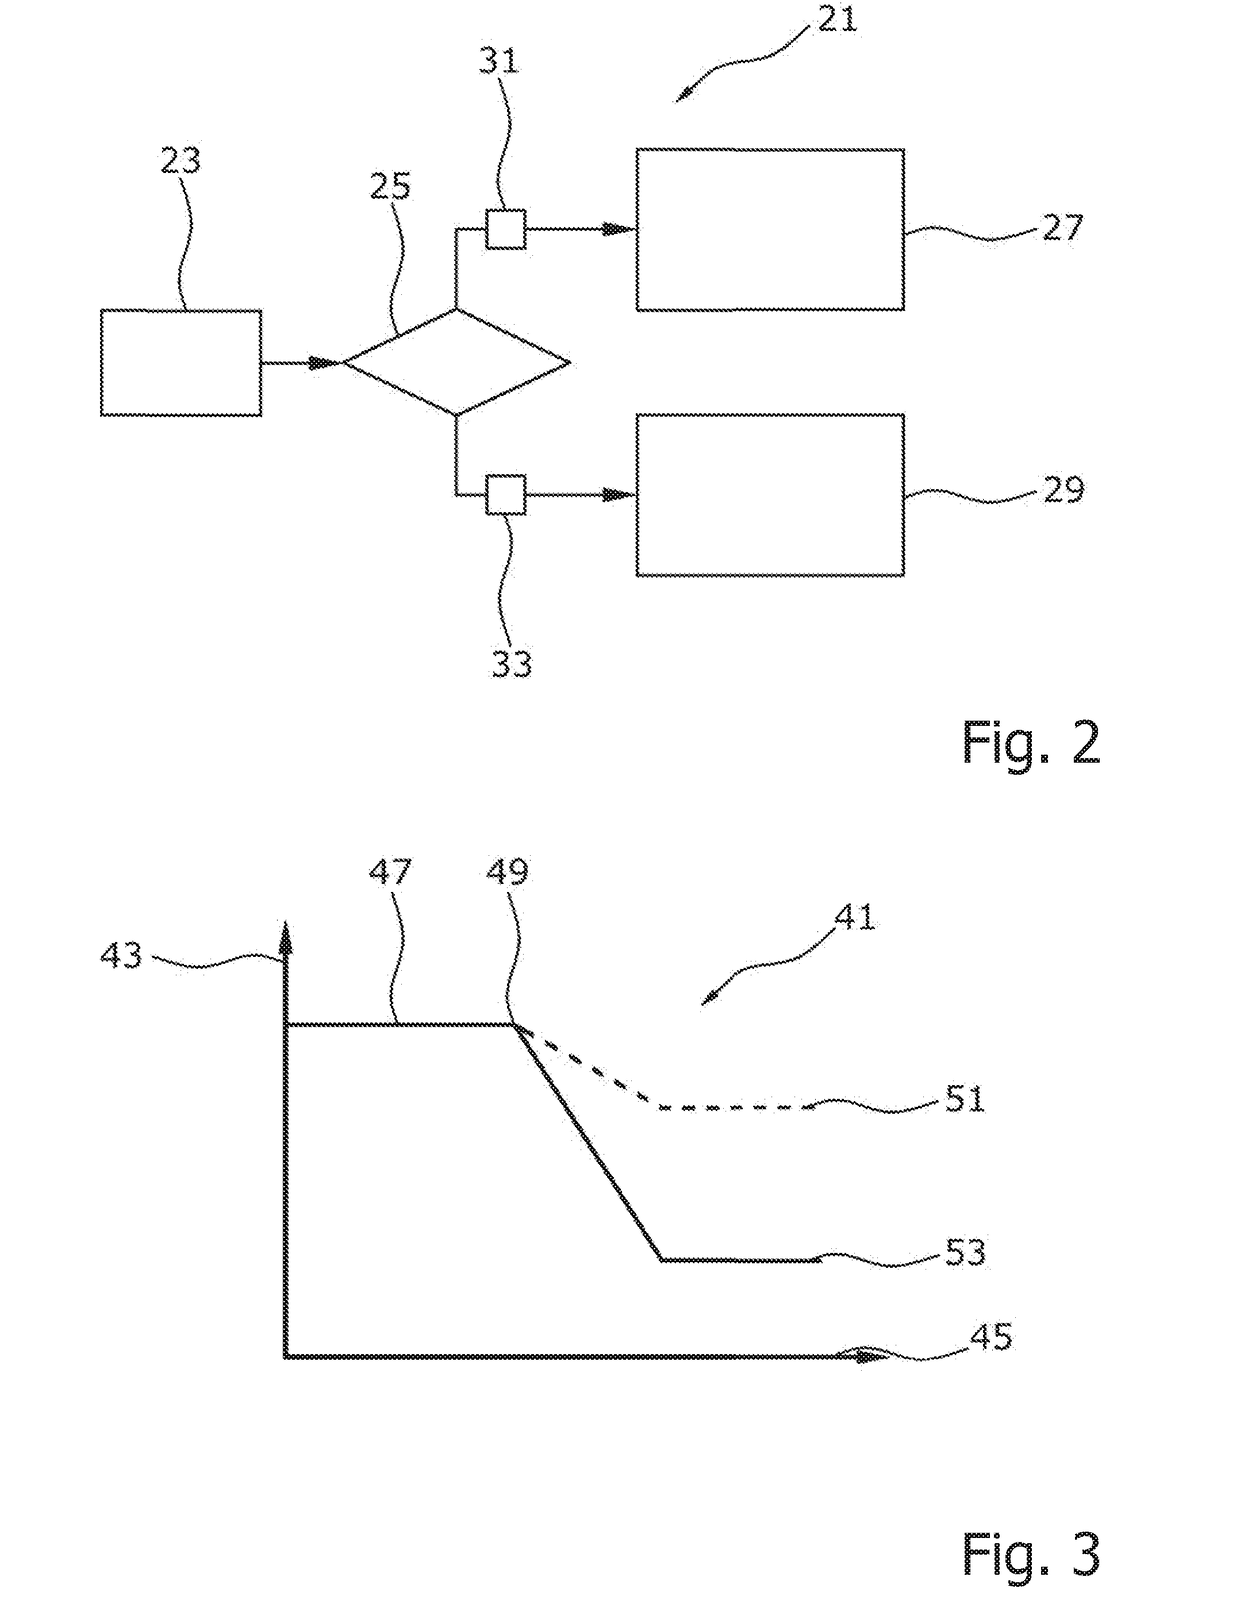 Emergency brake assist system for a vehicle